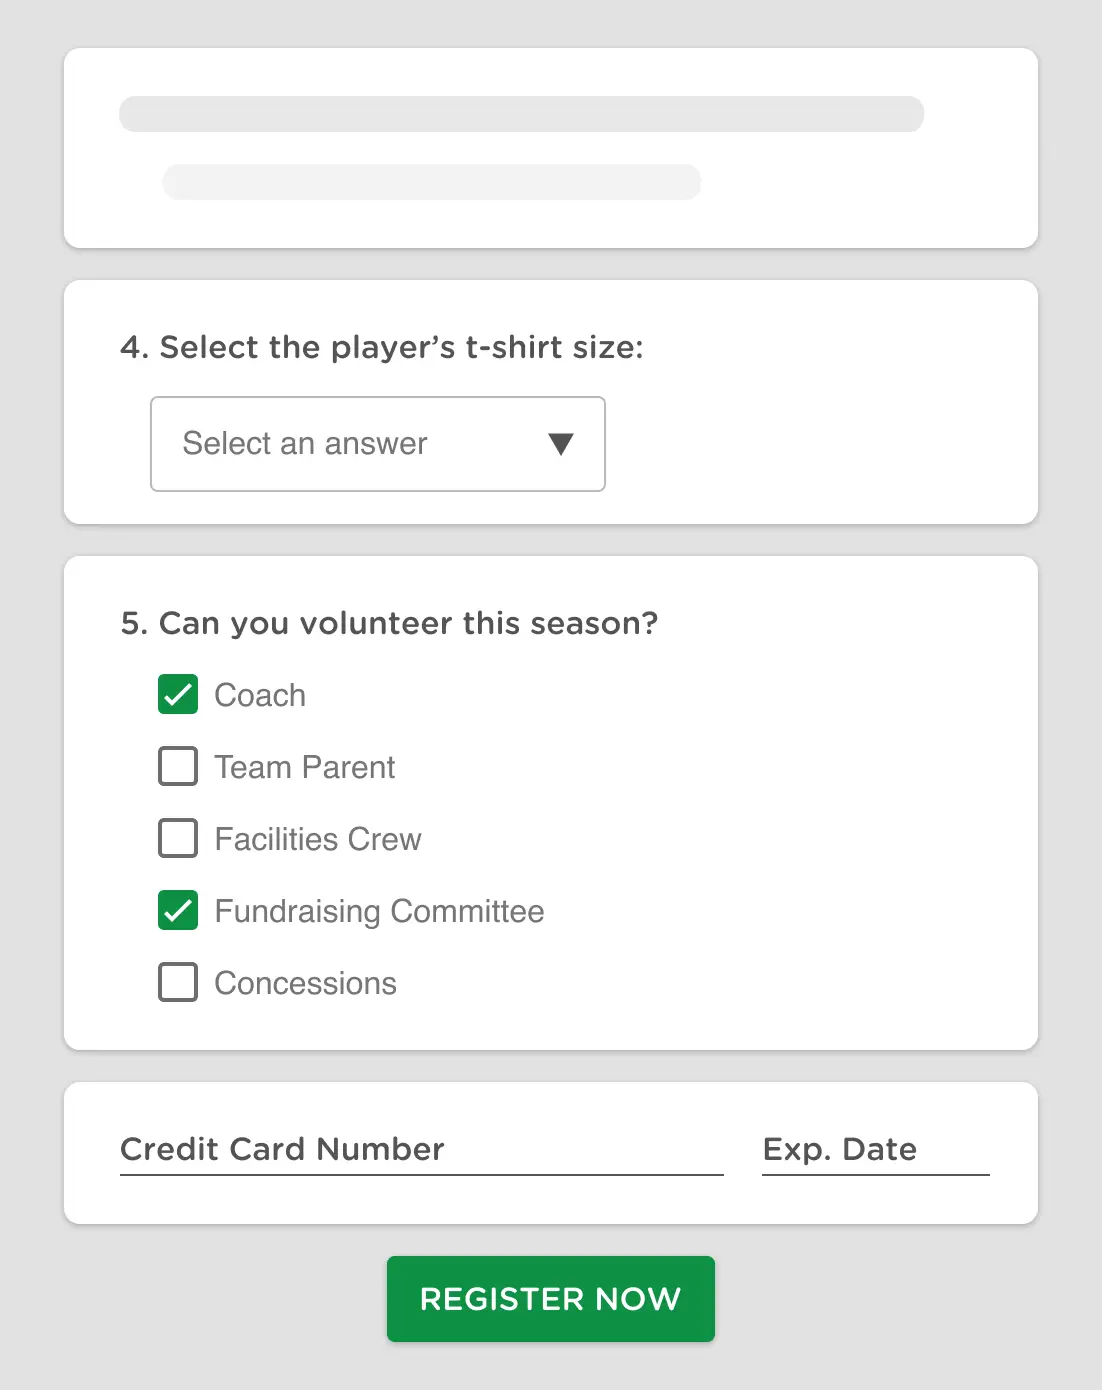 an online sports registration form with online payments for teams, clubs, and leagues